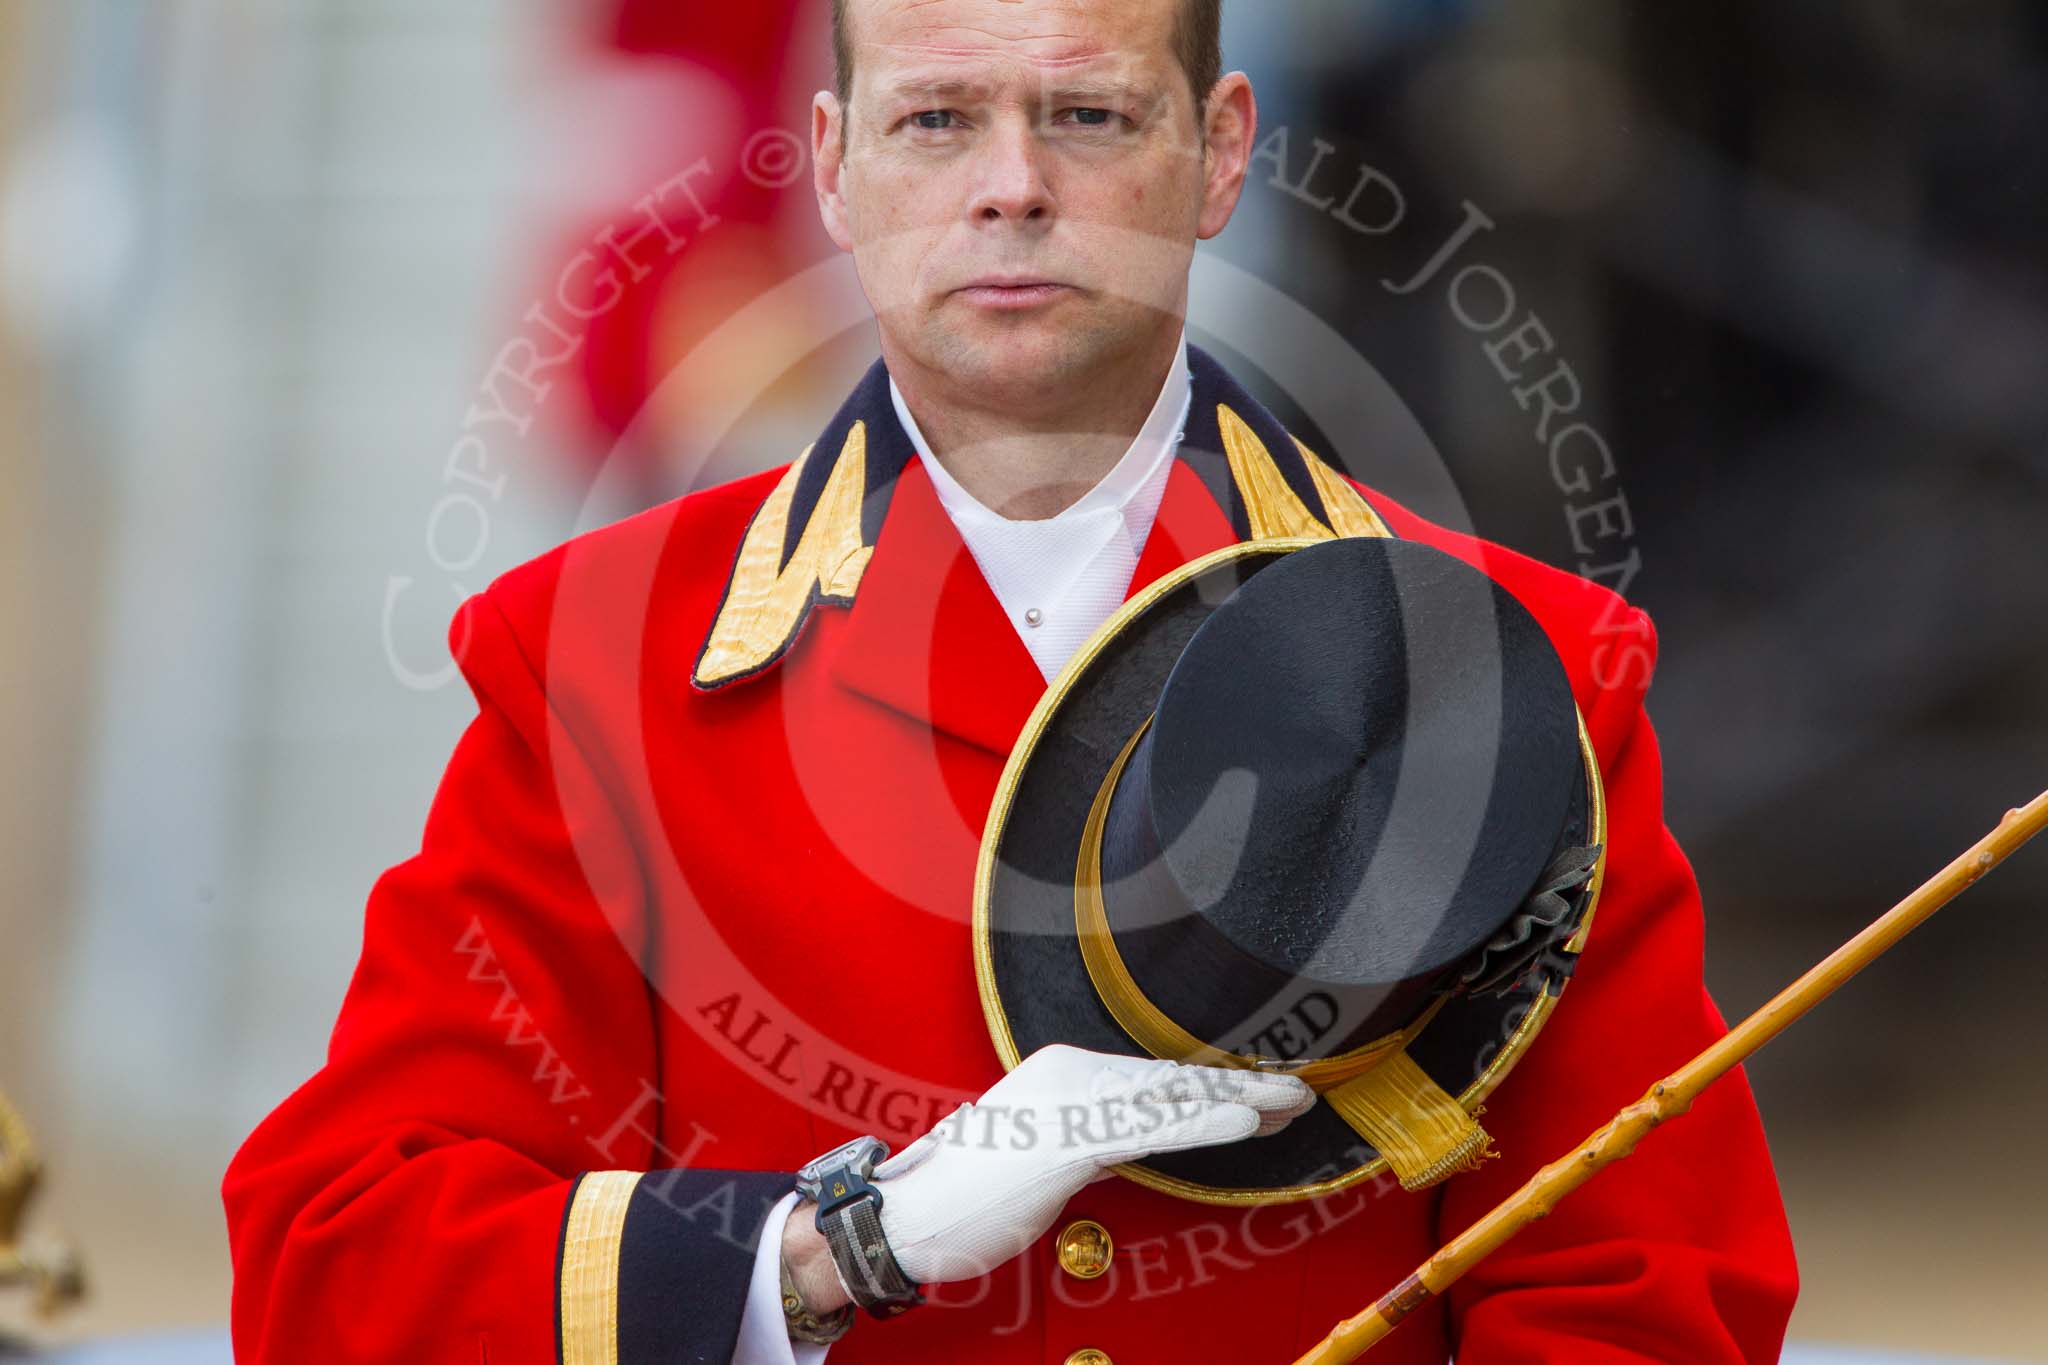 Trooping the Colour 2013: Mark Hargreaves, Head Coachman, during the National Anthem..
Horse Guards Parade, Westminster,
London SW1,

United Kingdom,
on 15 June 2013 at 11:01, image #298